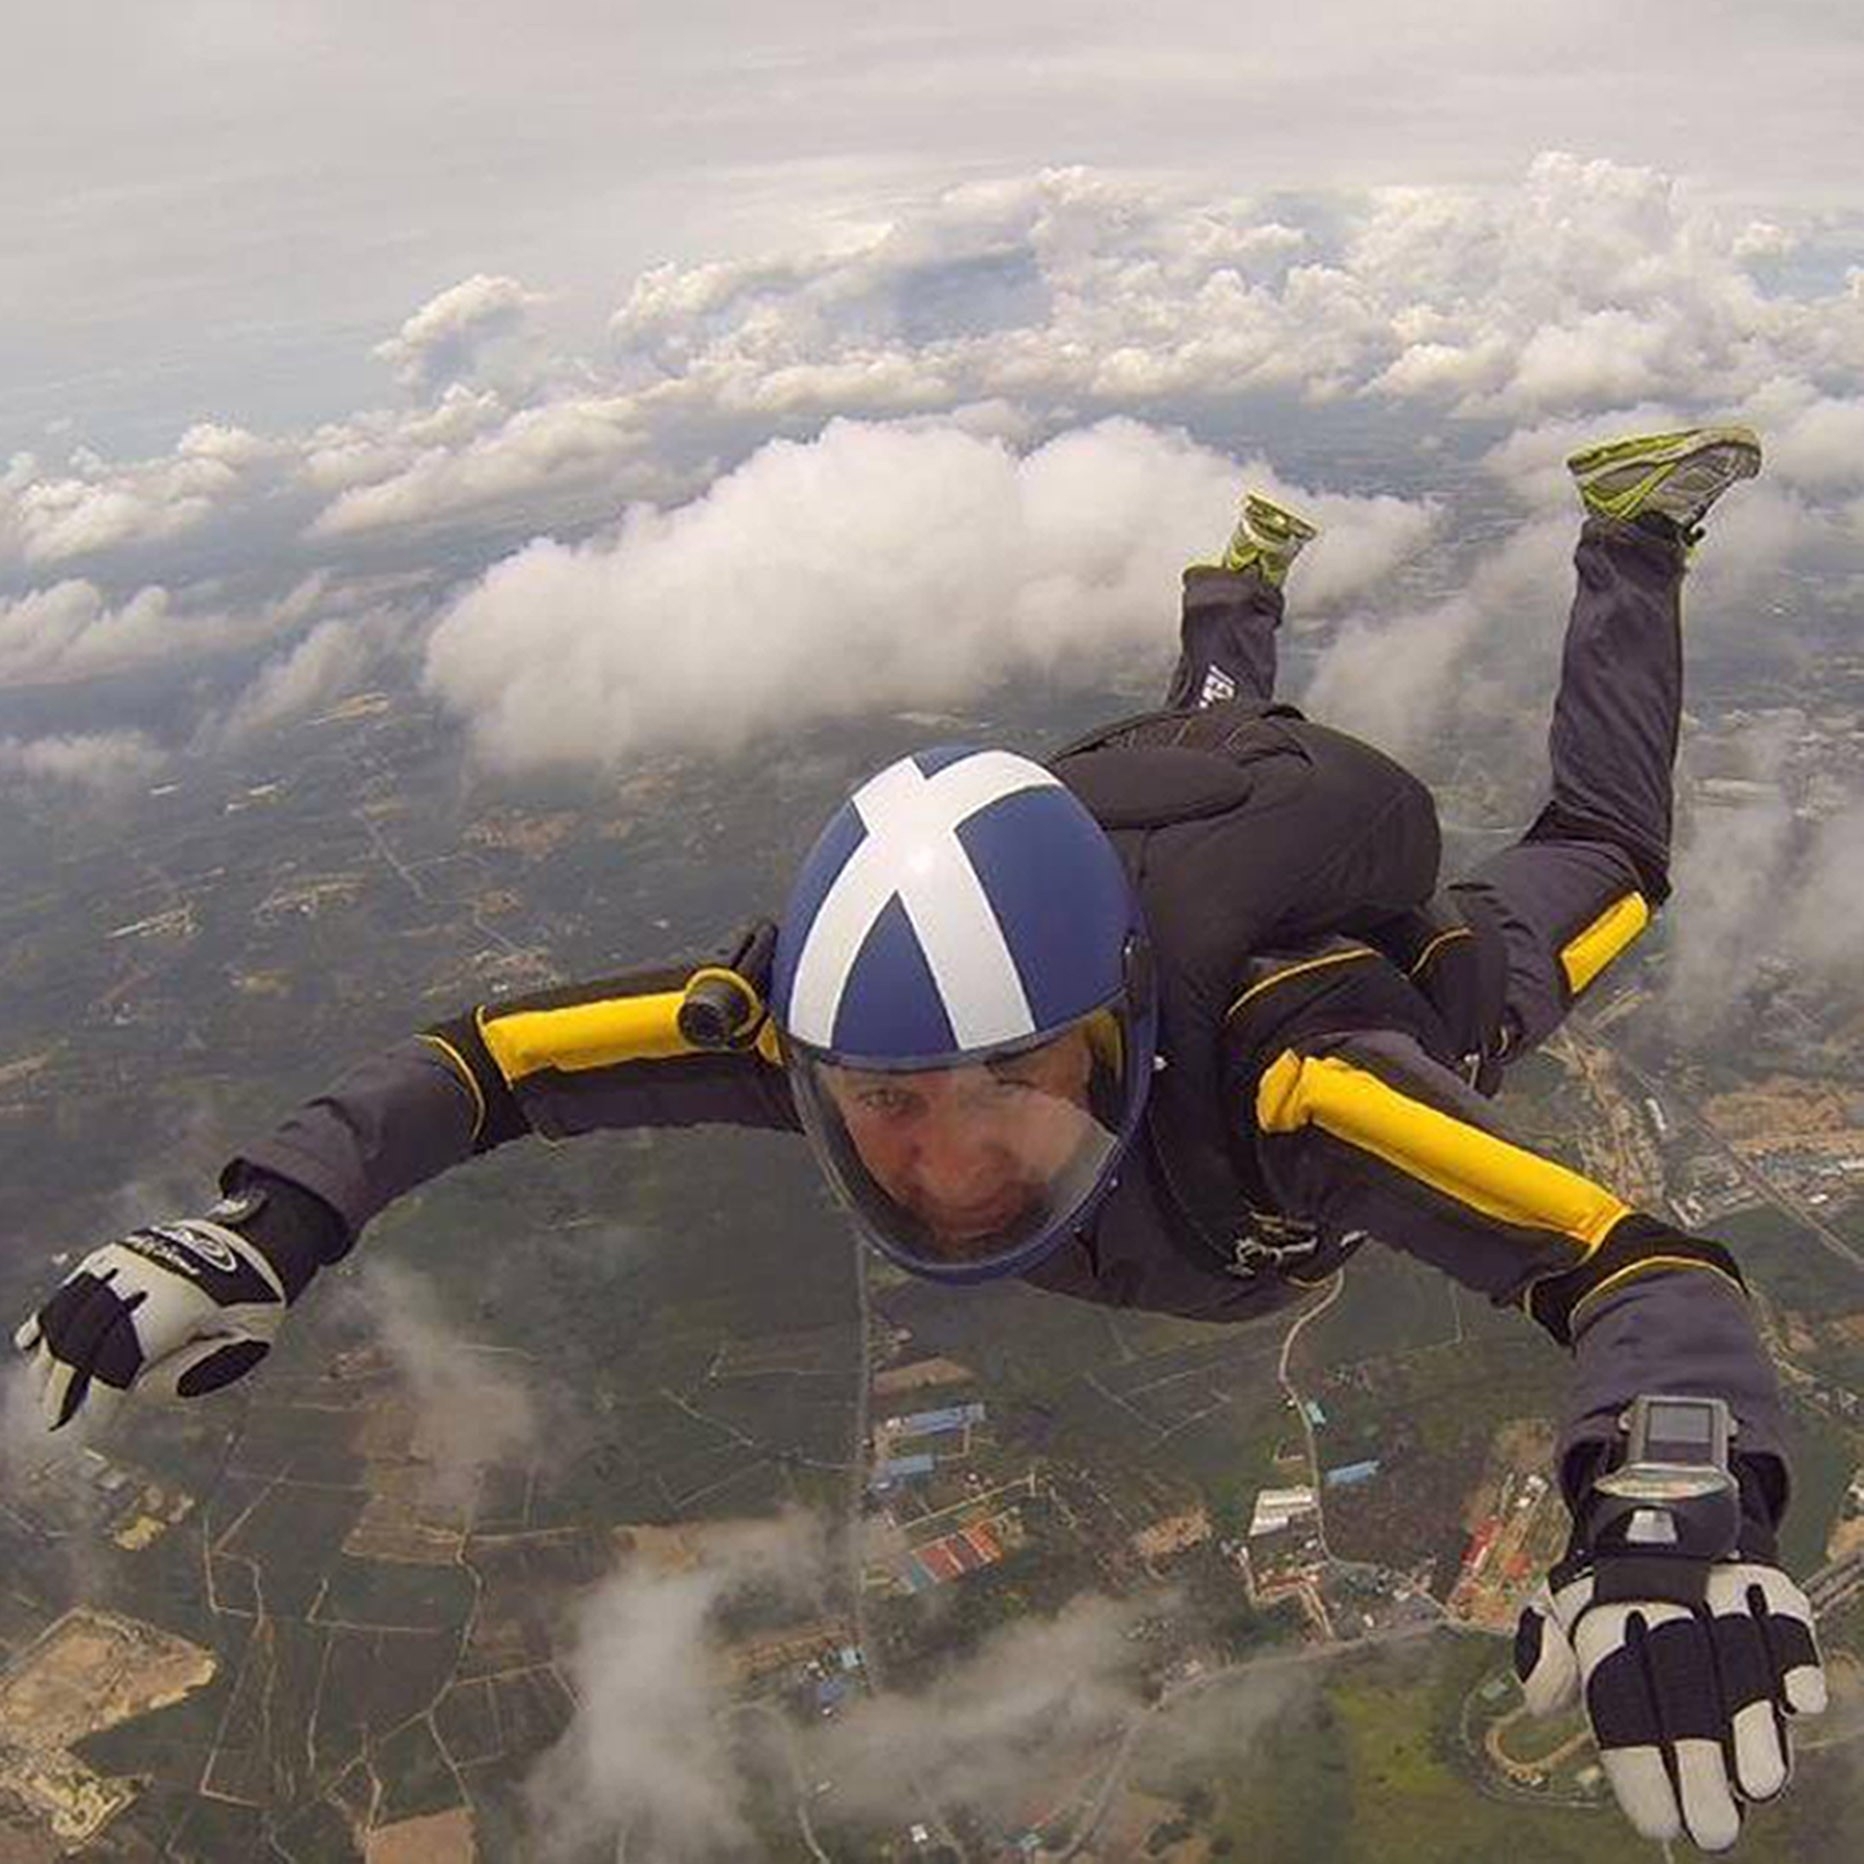 A Scottish man has died while skydiving in the Thai resort town of Pattaya